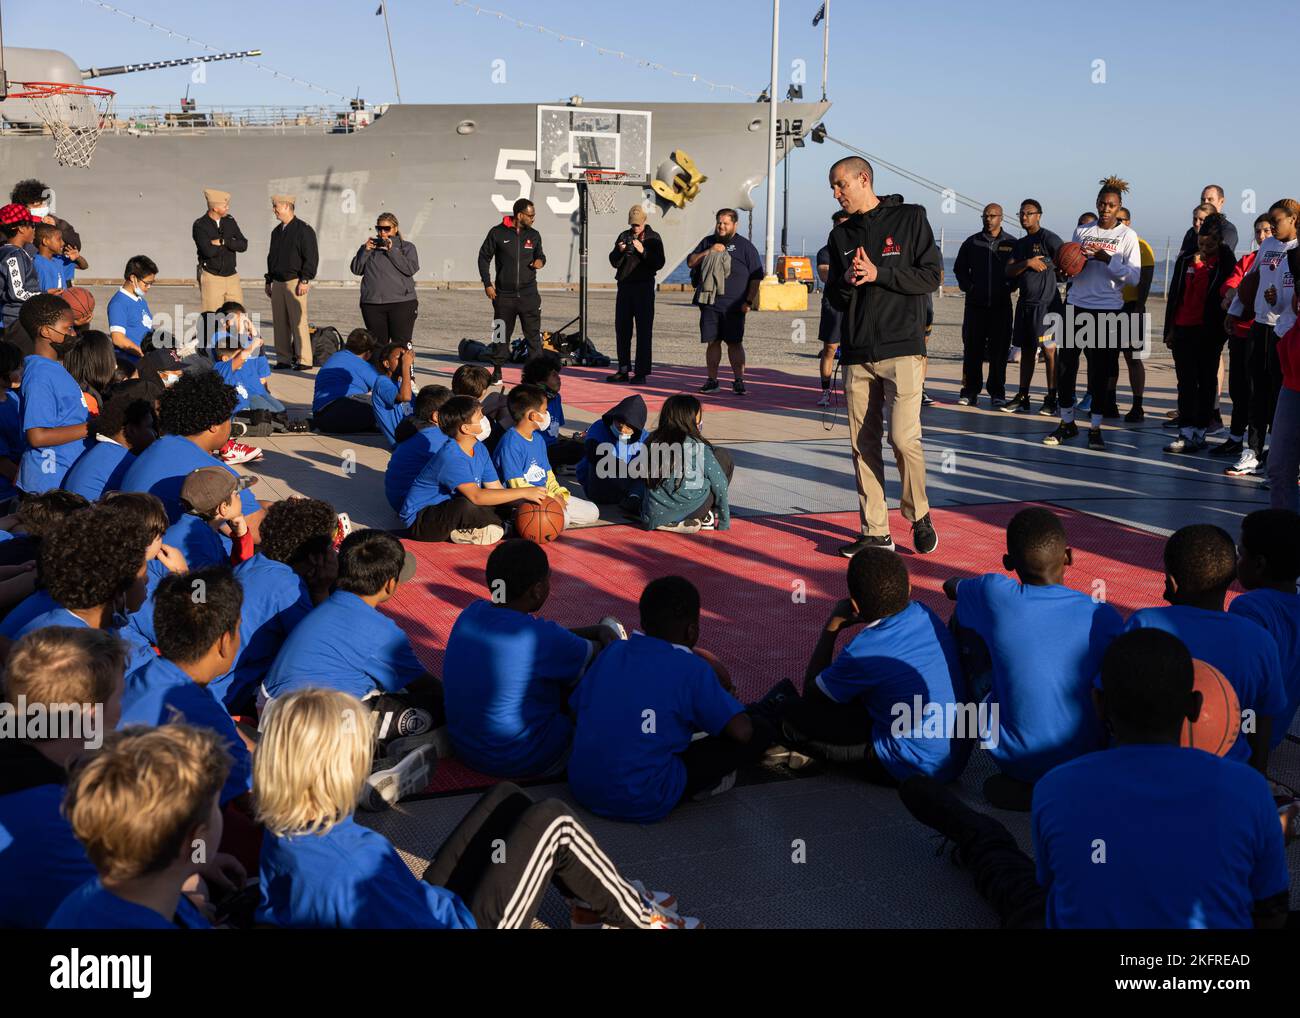 221004-M-VR919-1046 SAN FRANCISCO (October 4, 2022) Scott Waterman, men’s basketball head coach for Academy of Art University, speaks to the children from the Boys and Girls Club of San Francisco about the rules of the Hoops with the Troops event at the Port of San Francisco, California, Oct. 4, 2022. SFFW is an opportunity for the American public to meet their Navy, Marine Corps and Coast Guard teams and experience America’s sea services. During fleet week, service members participate in various community service events, showcase capabilities and equipment to the community, and enjoy the hosp Stock Photo